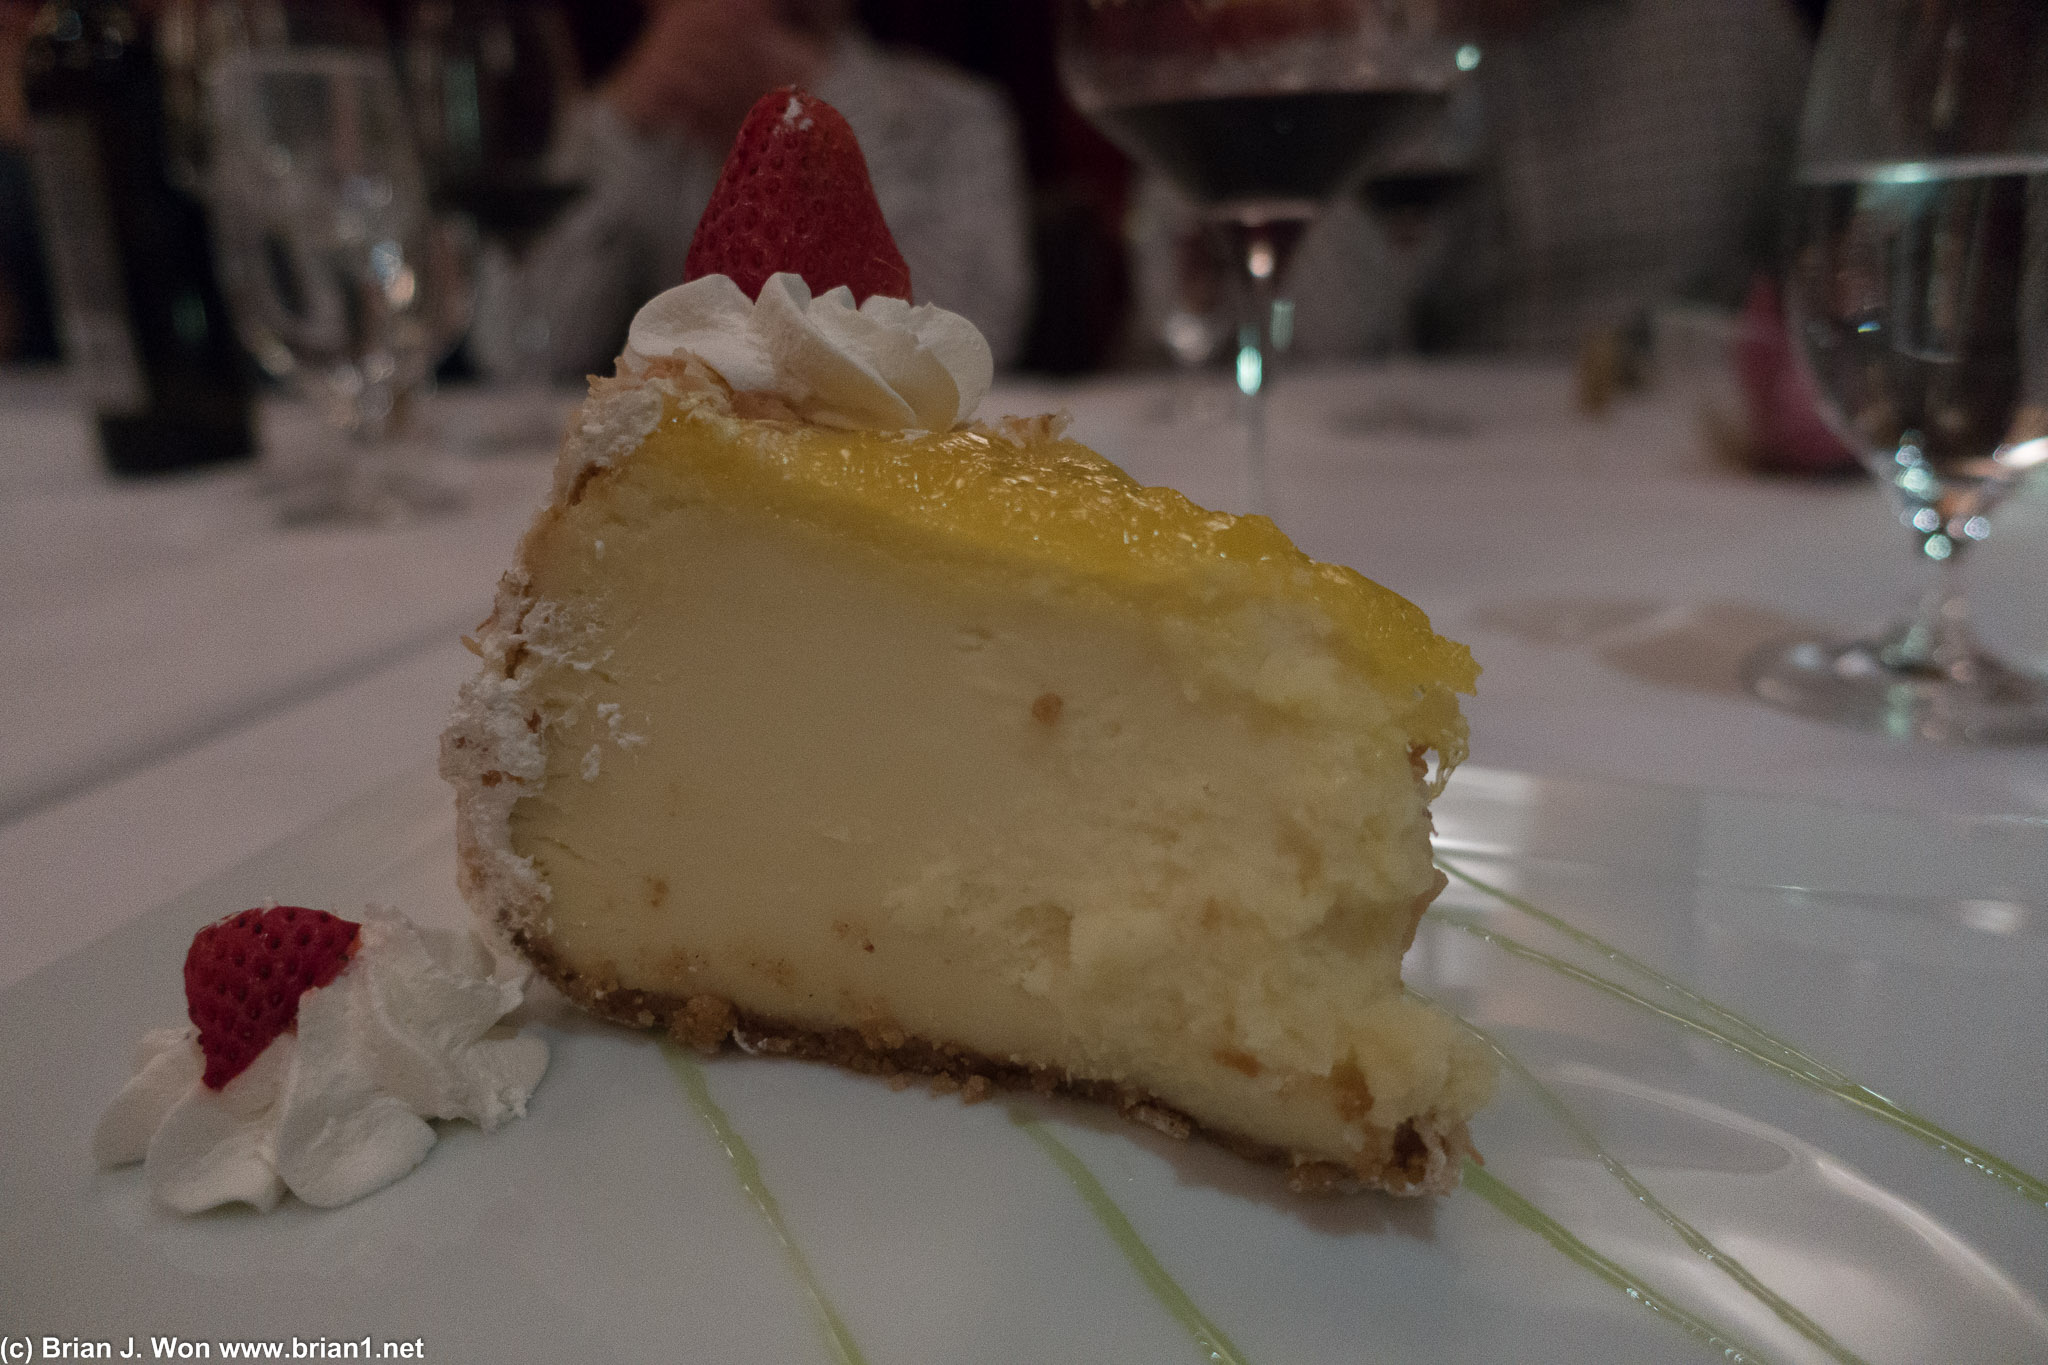 Huge cheesecake slice. They said it was pina colada topping.